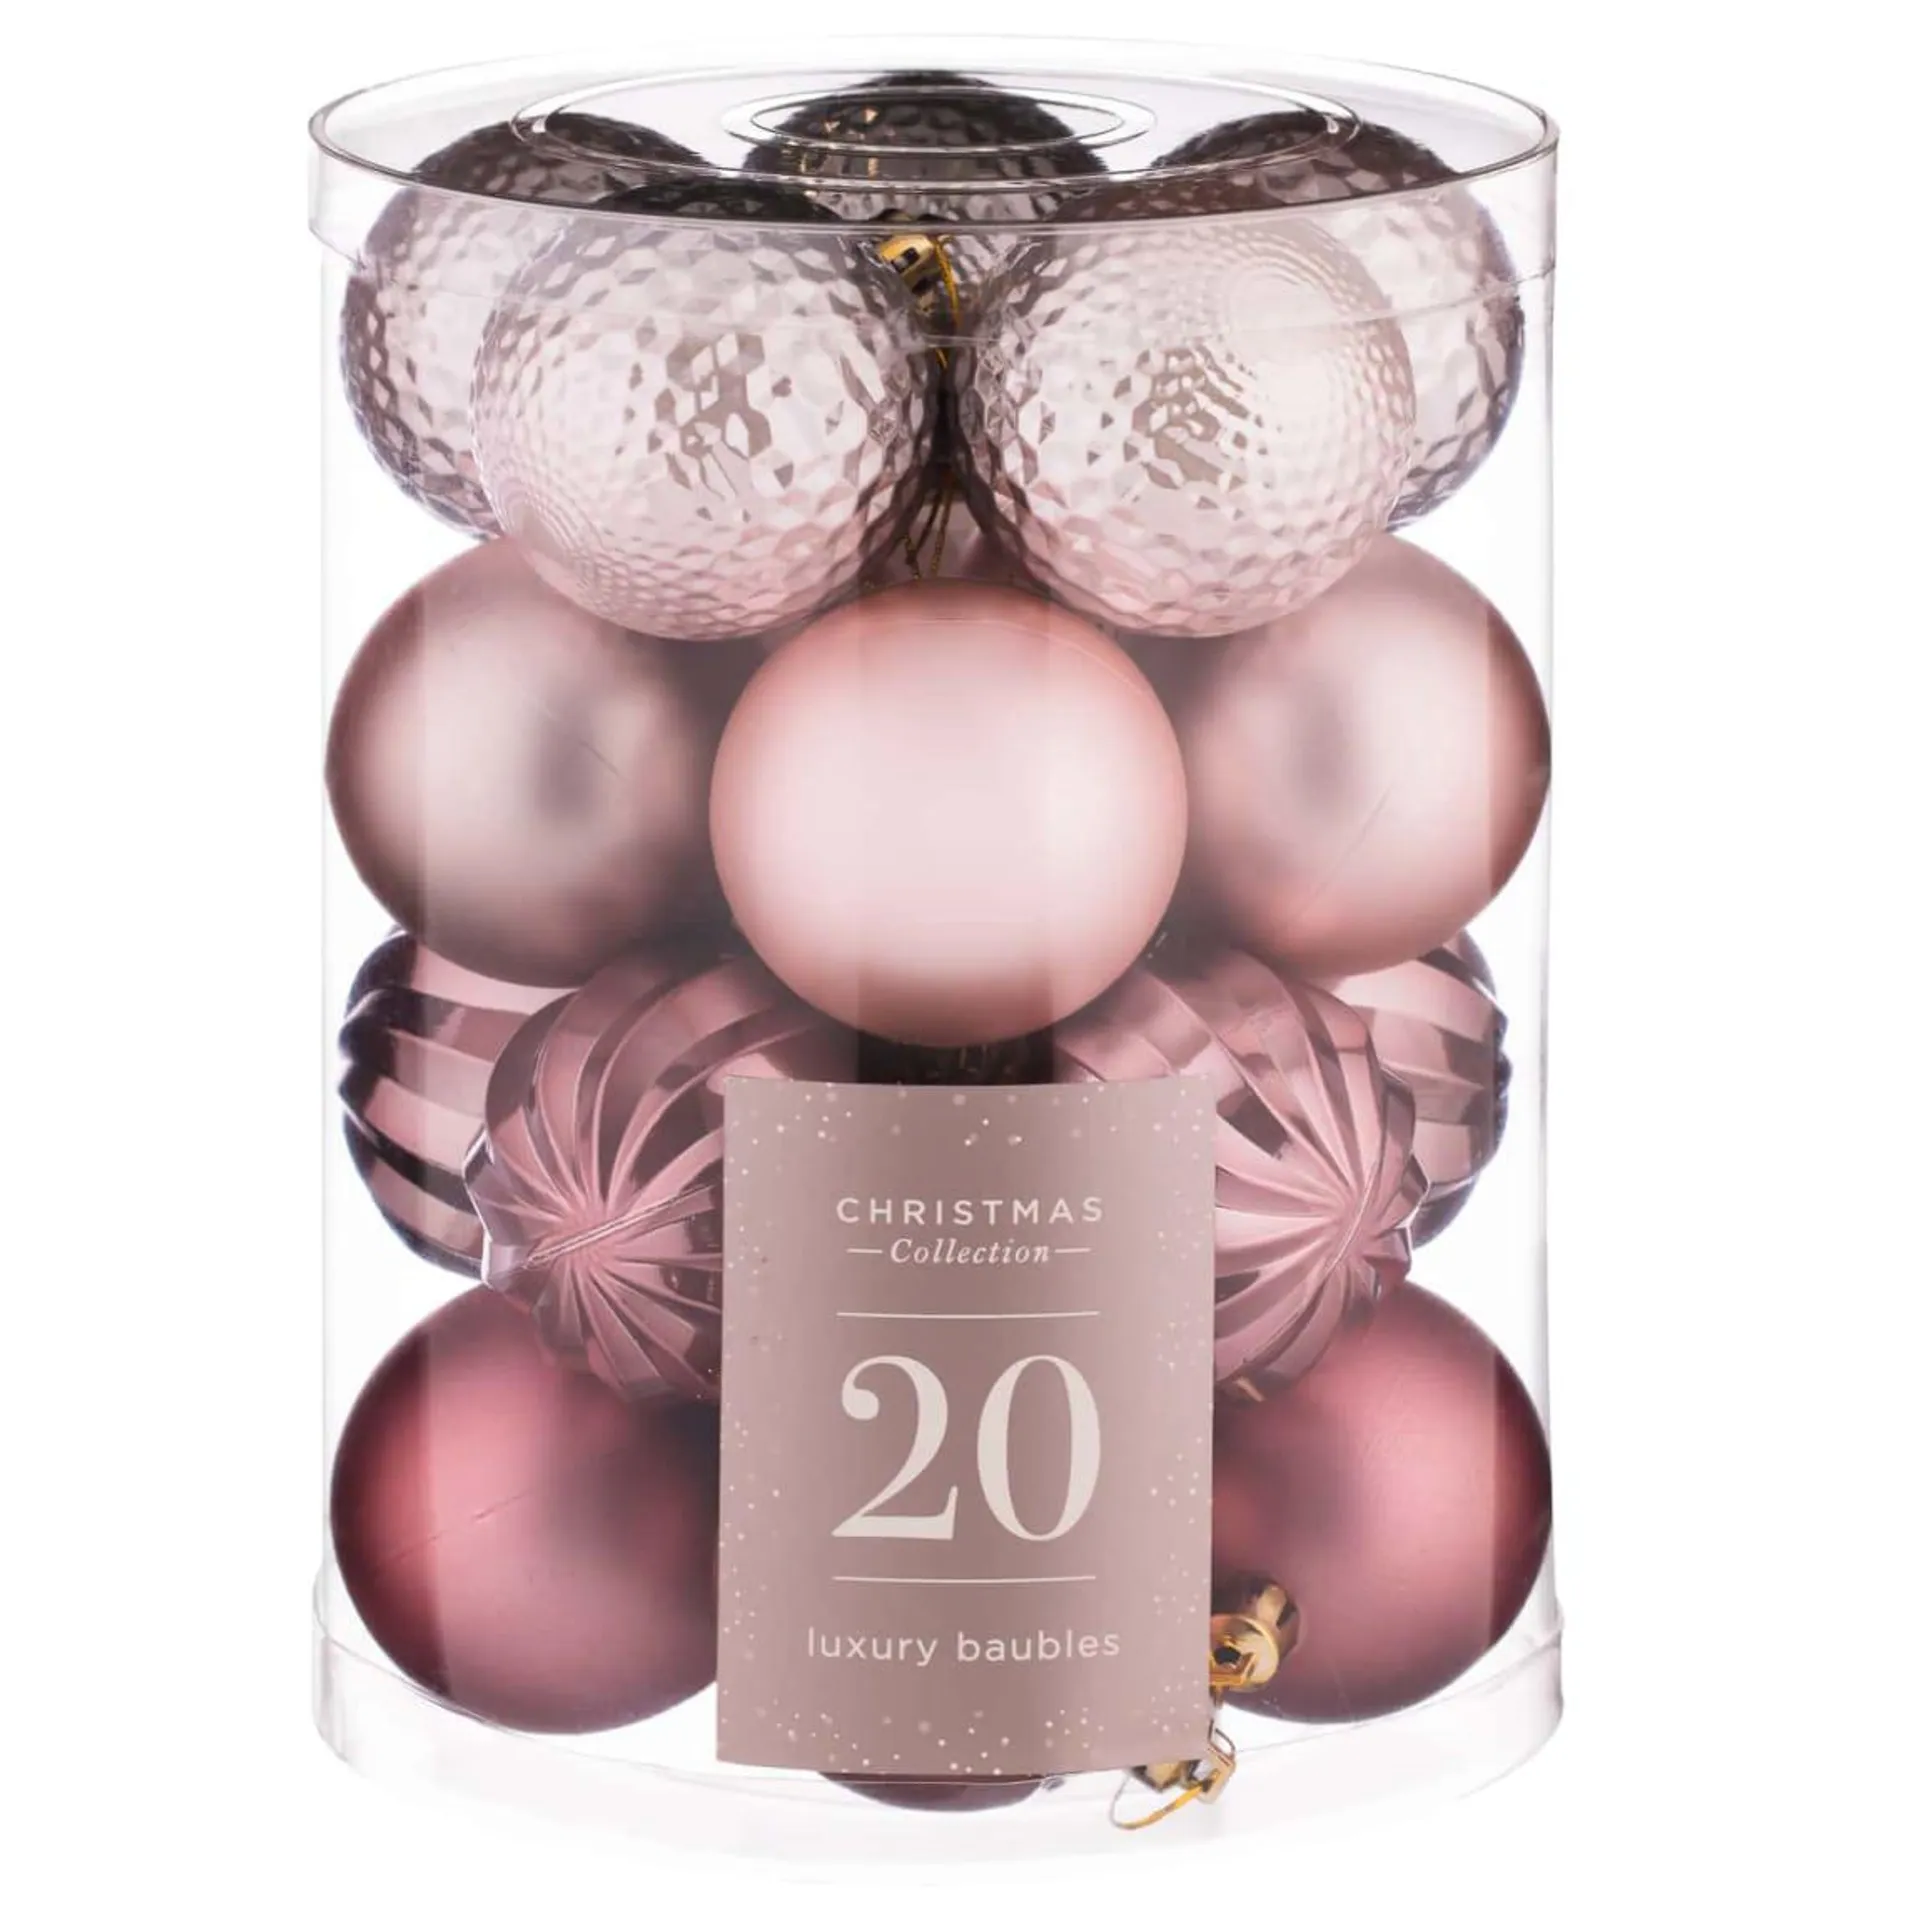 Christmas Collection Luxury Baubles 20pk - Blush